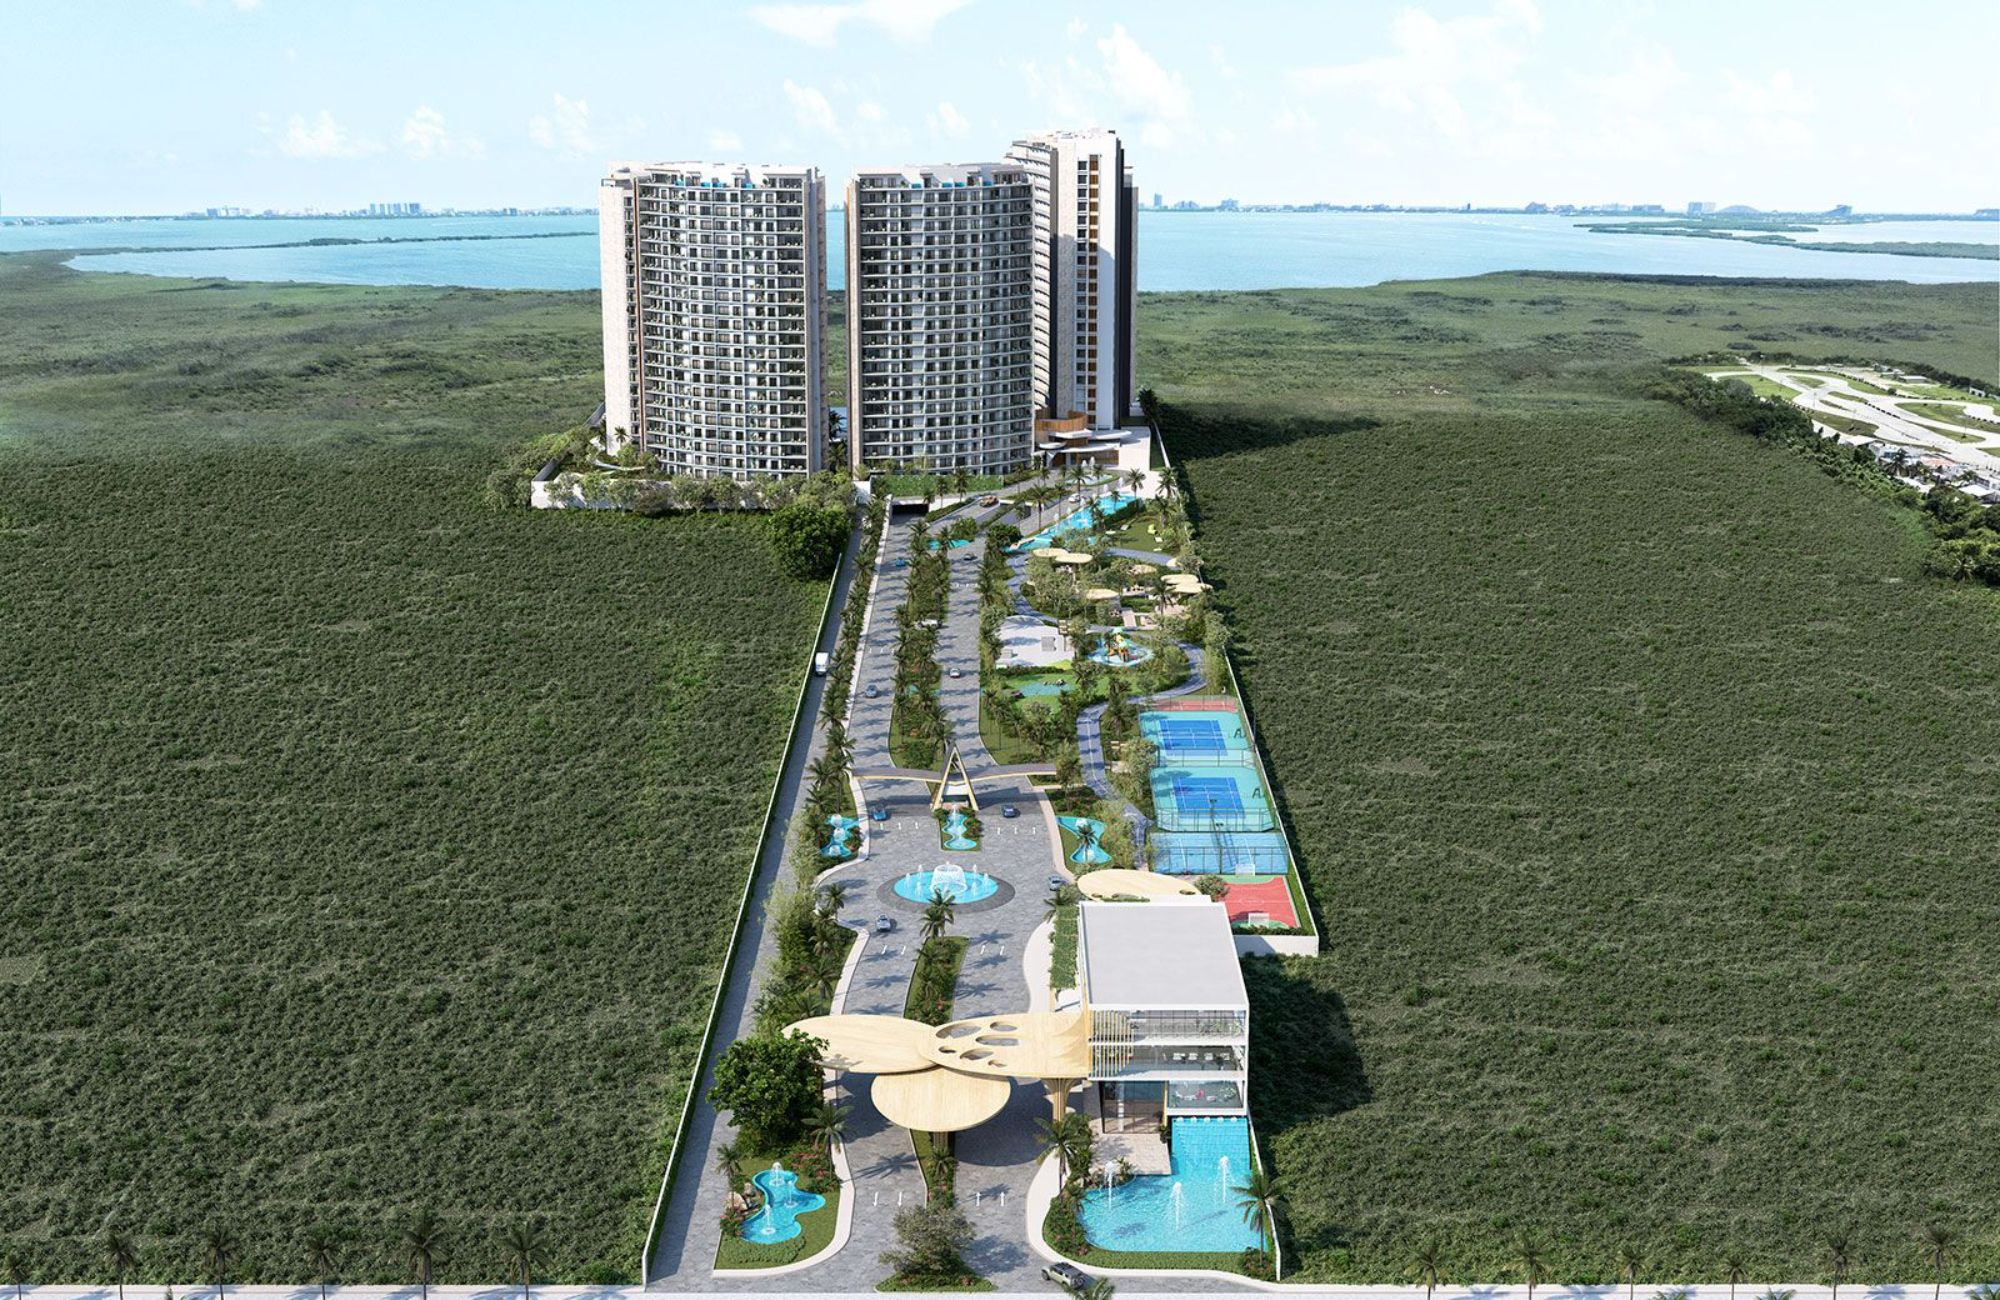 Luxury apartment with concierge, cinema, spa, gym, sky lounge, restaurant, dog area and more amenities in pre-construction, for sale Cancun.